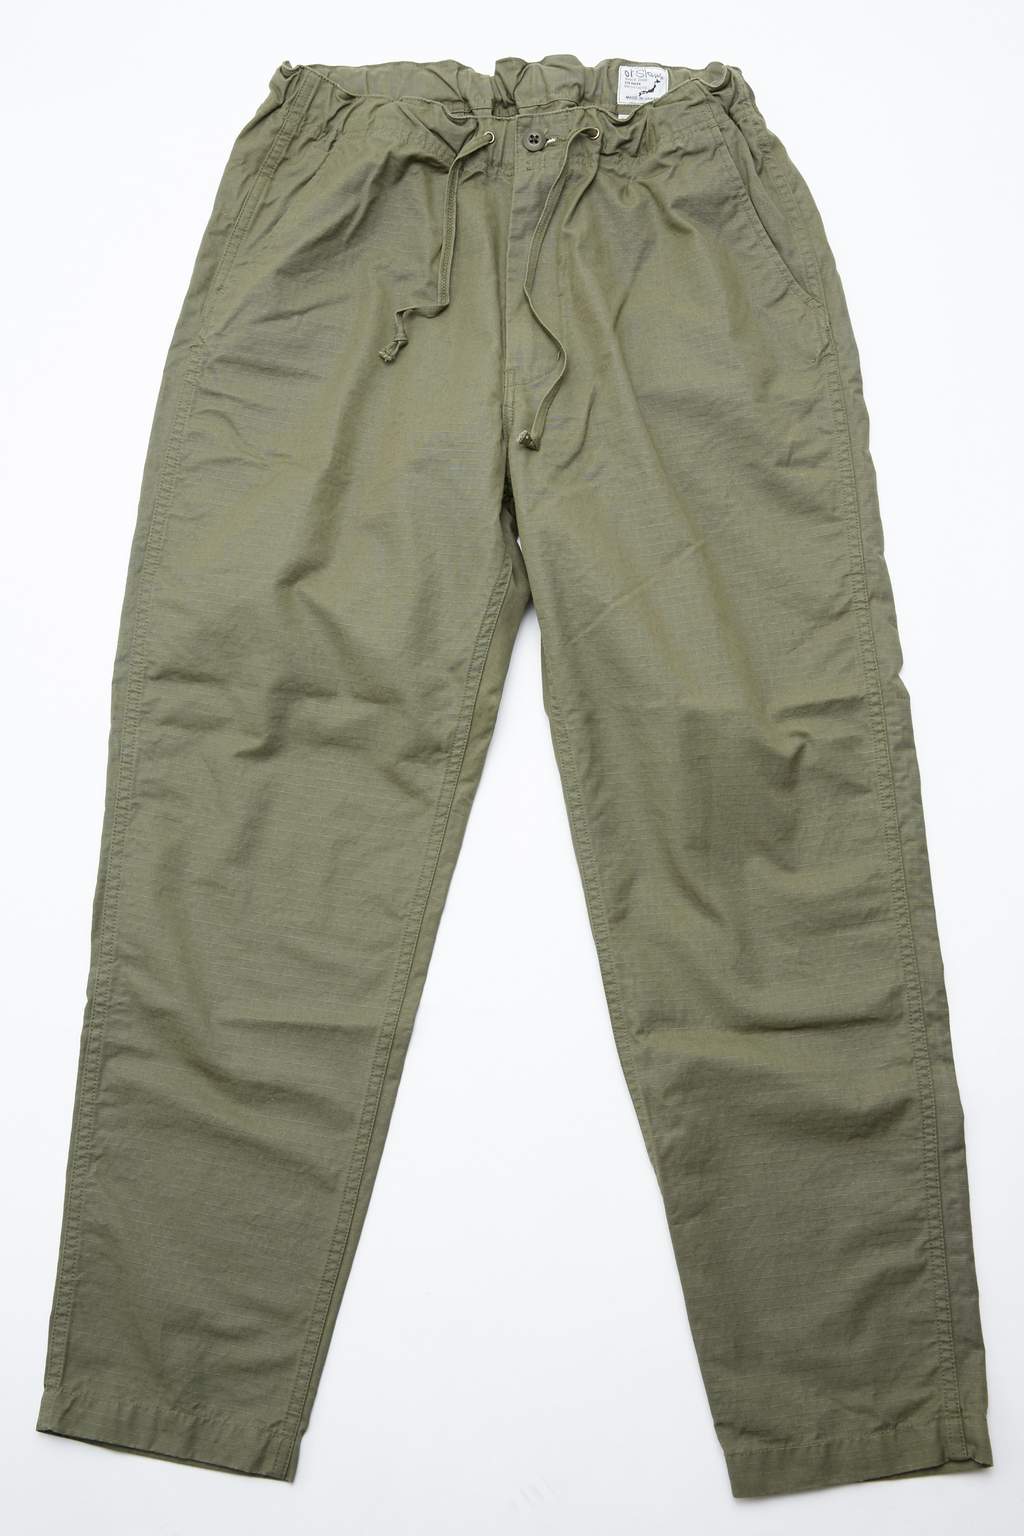 Orslow New Yorker Pants - Army Green